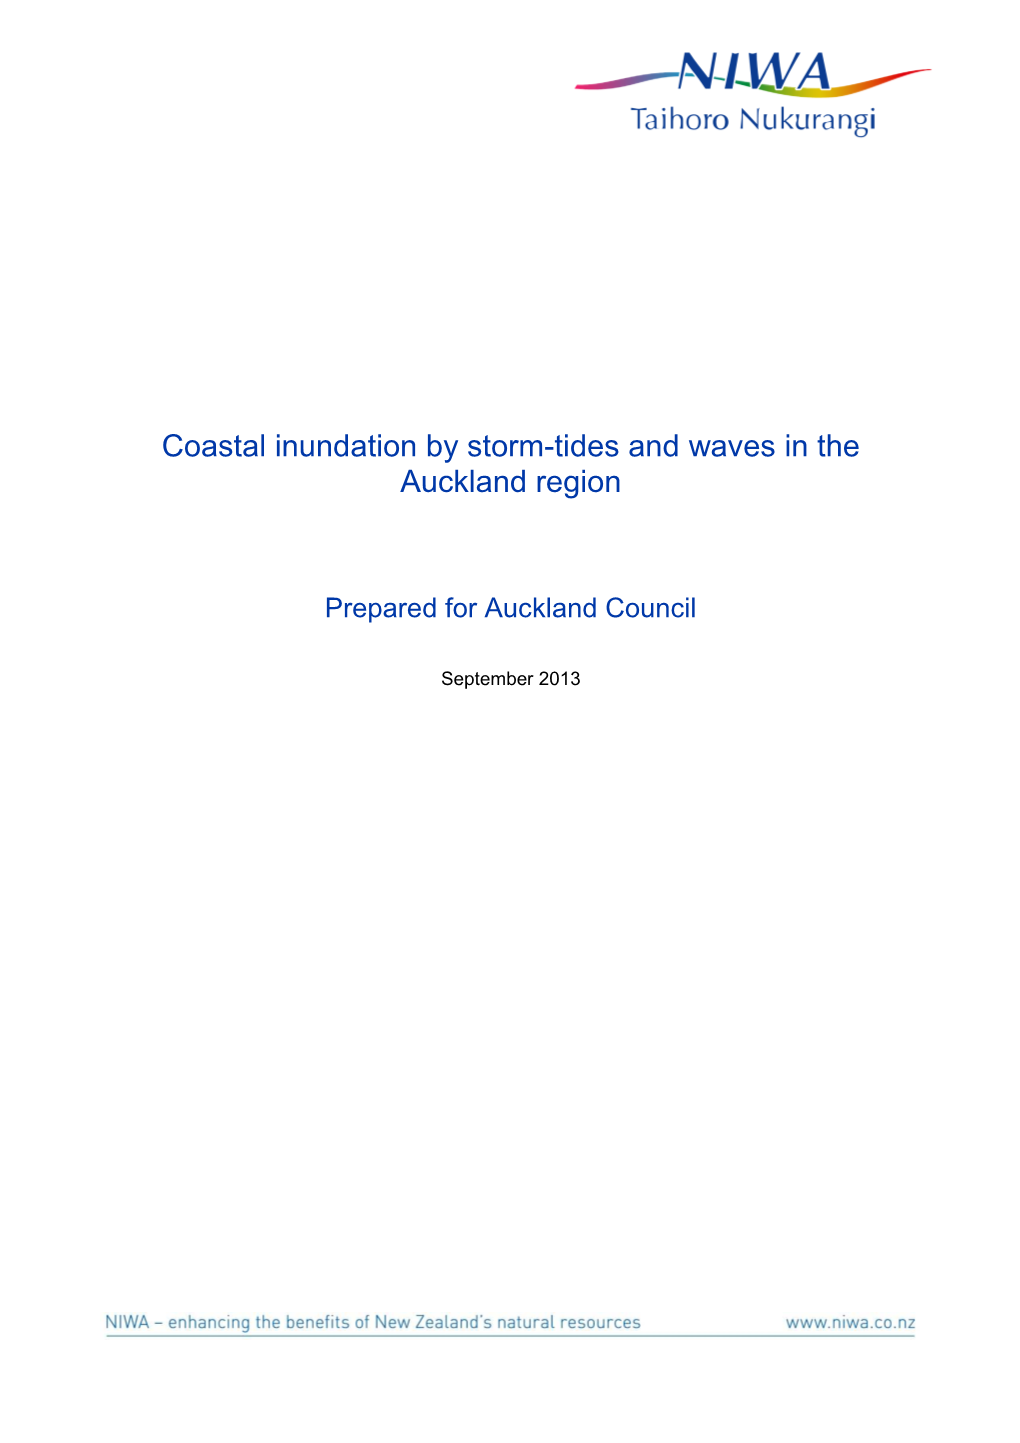 Coastal Inundation by Storm-Tides and Waves in the Auckland Region